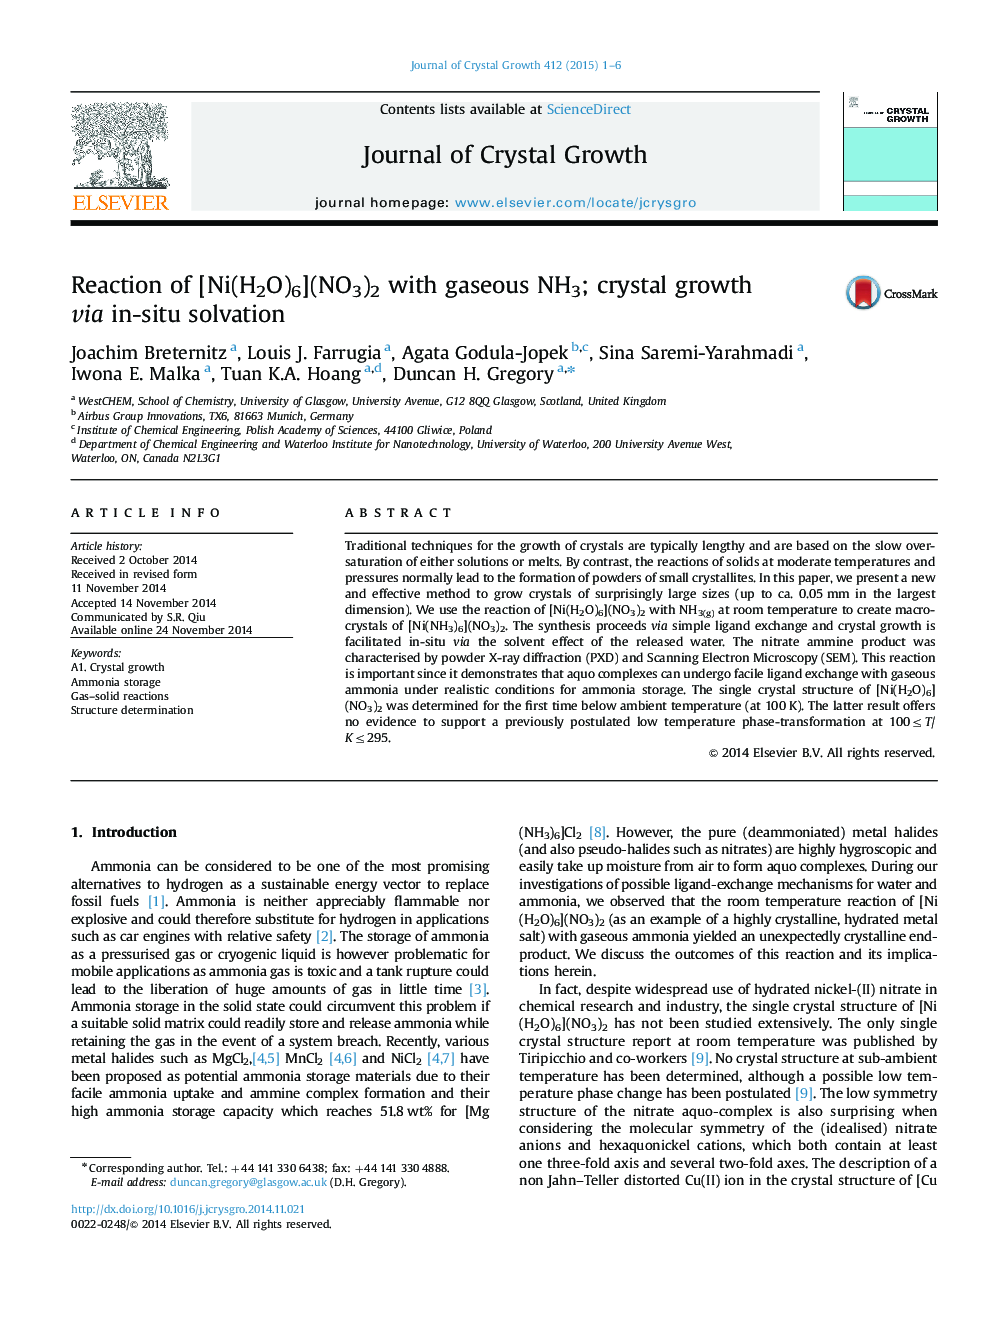 Reaction of [Ni(H2O)6](NO3)2 with gaseous NH3; crystal growth via in-situ solvation